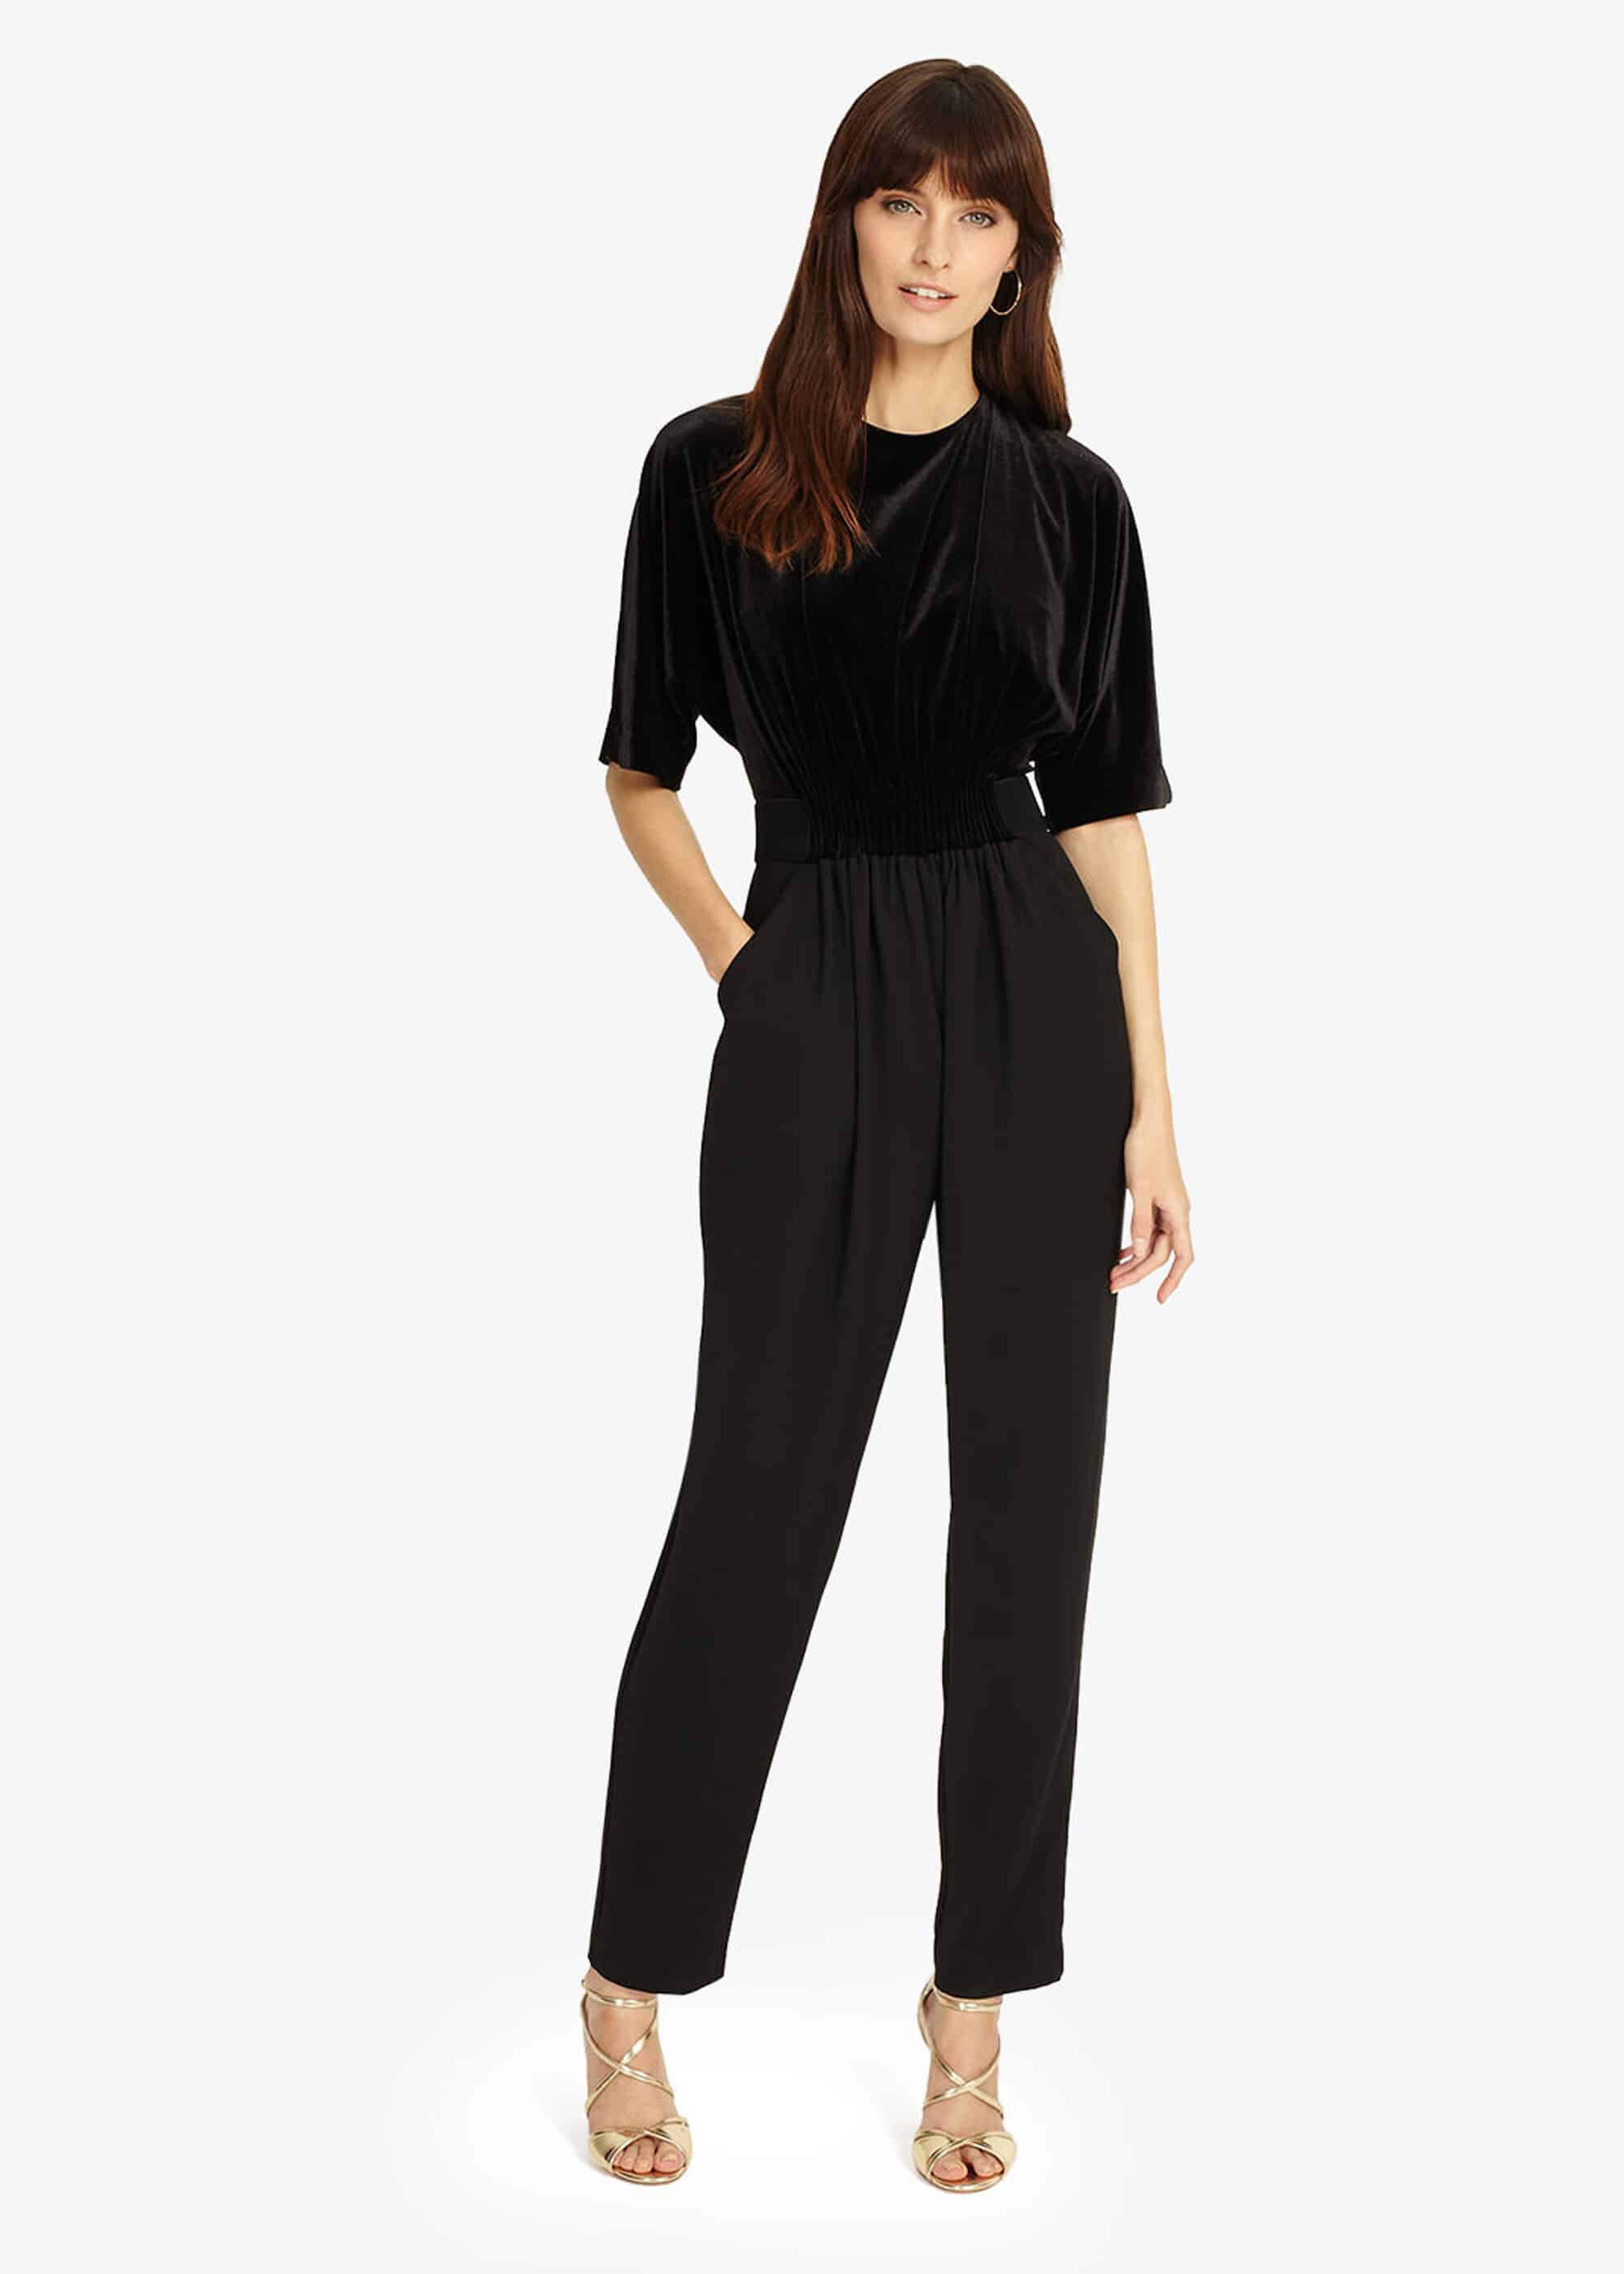 Black Jumpsuit Phase Eight Flash Sales, UP TO 57% OFF 